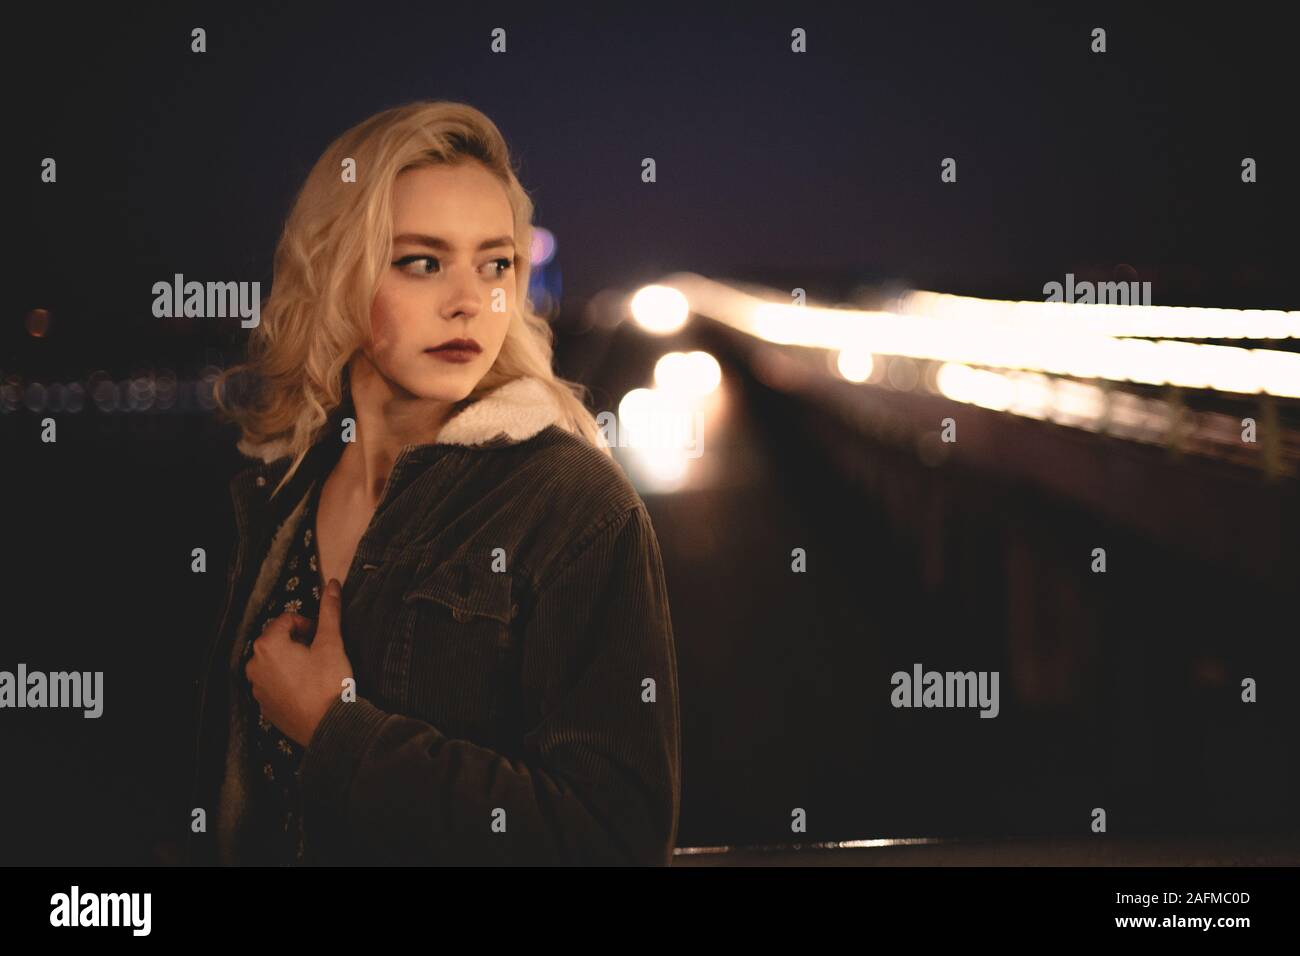 Portrait of young woman standing against illuminated bridge in city Stock Photo